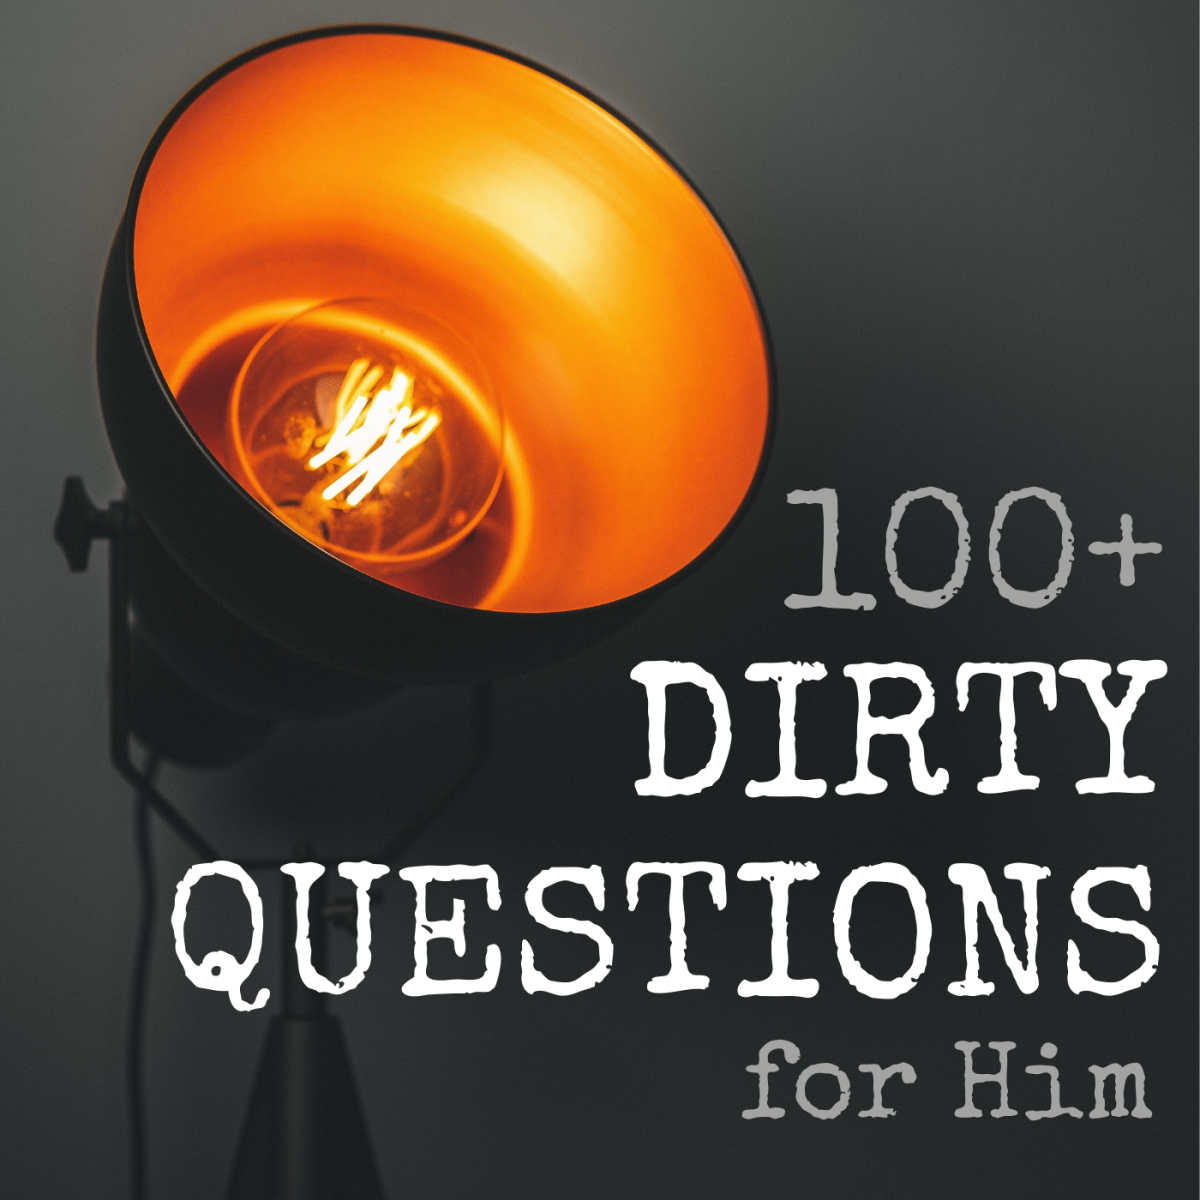 Question game questions to ask a guy